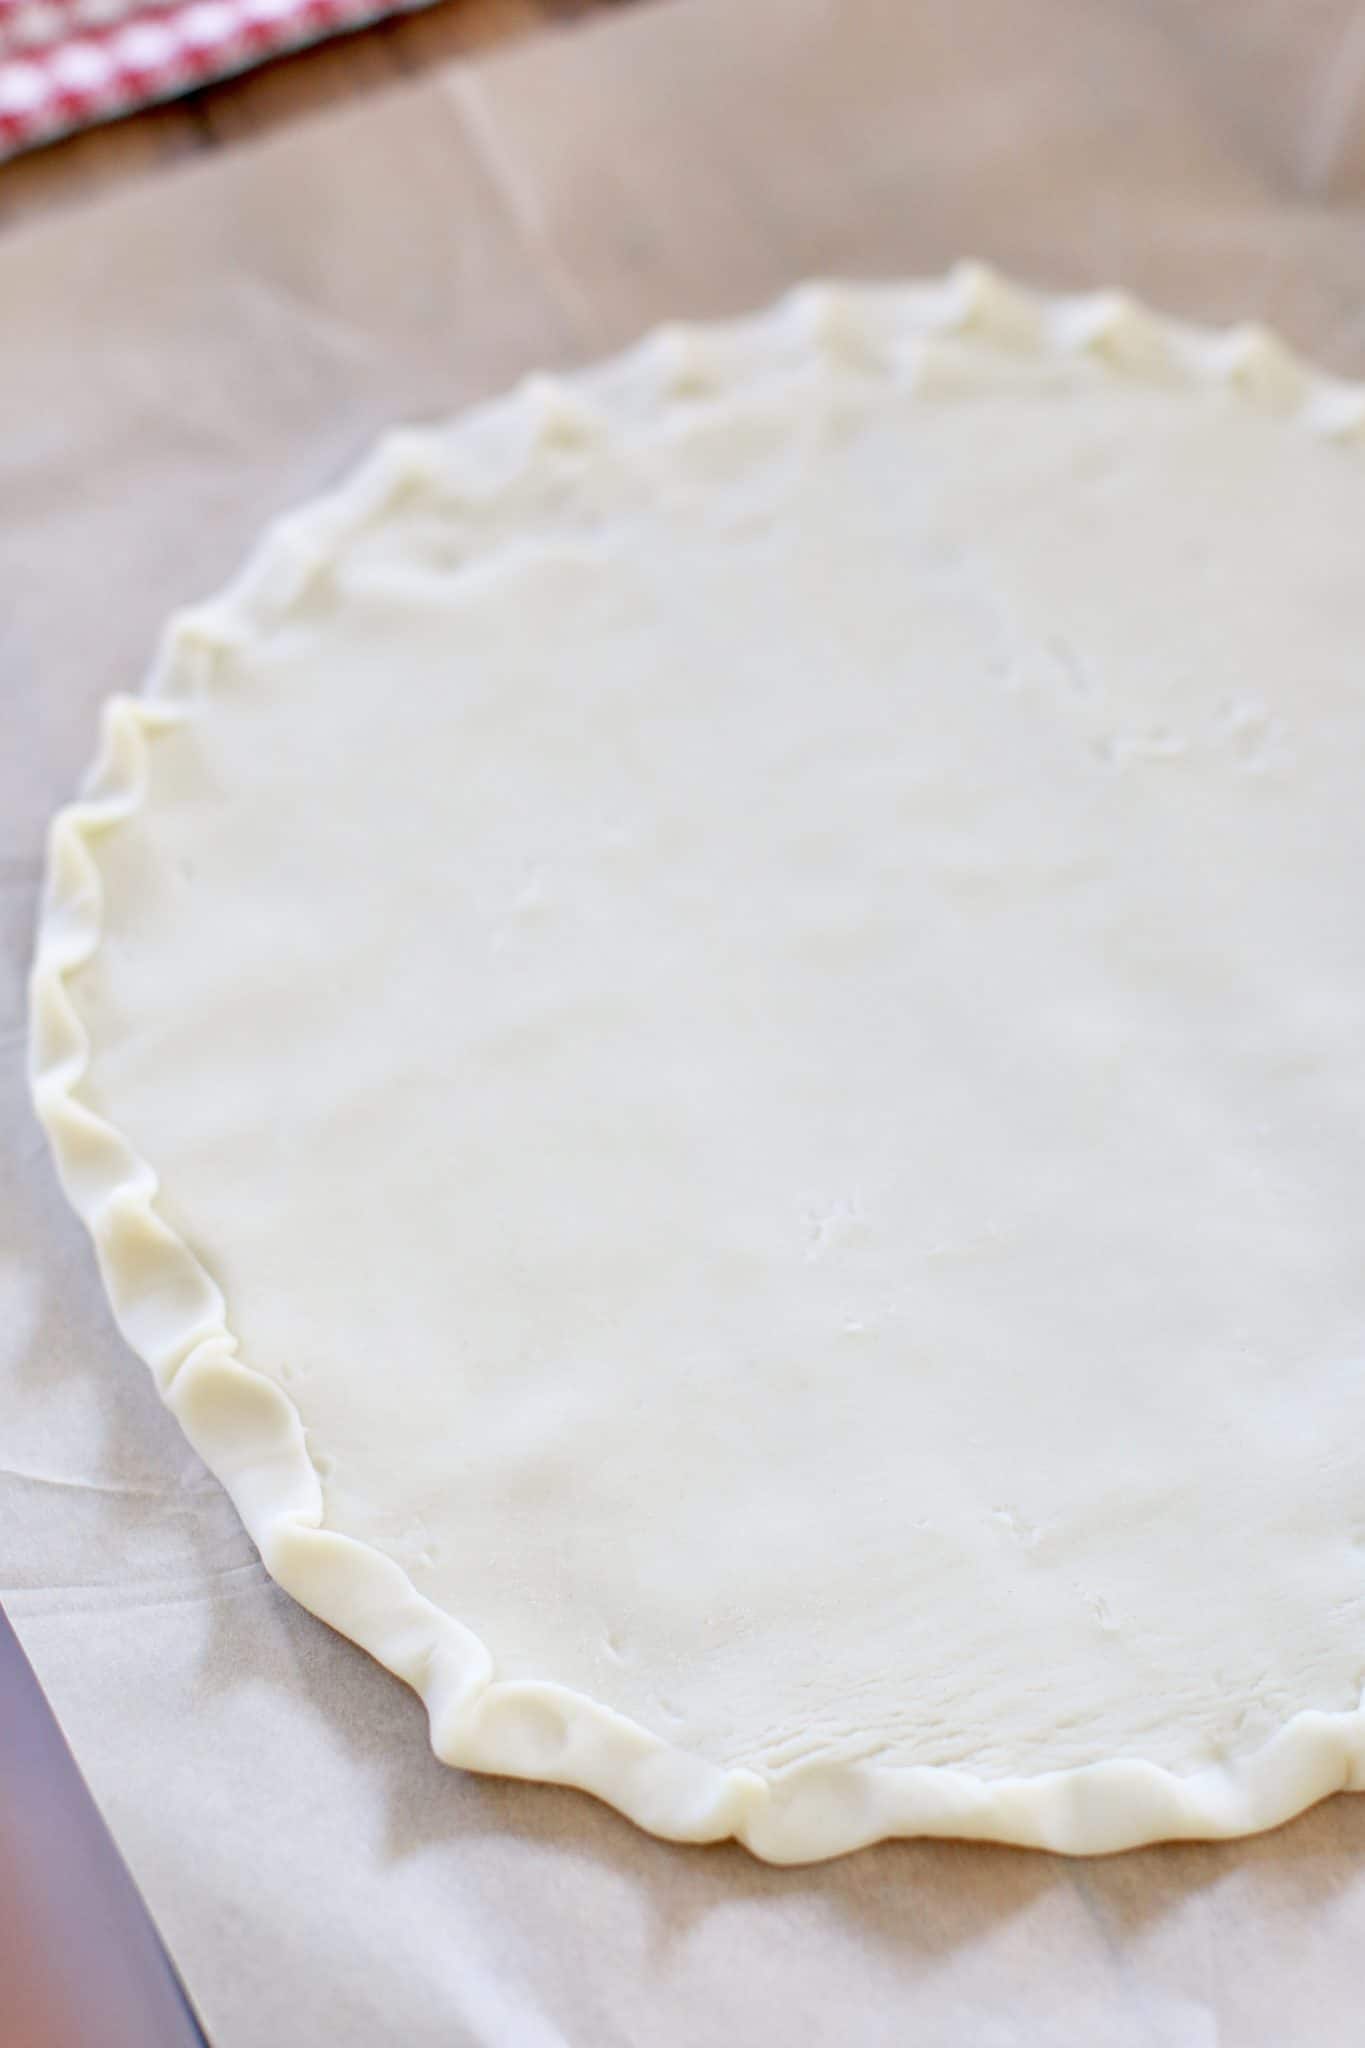 refrigerated pie crust placed on parchment and pressed into a circle with crimped edges.